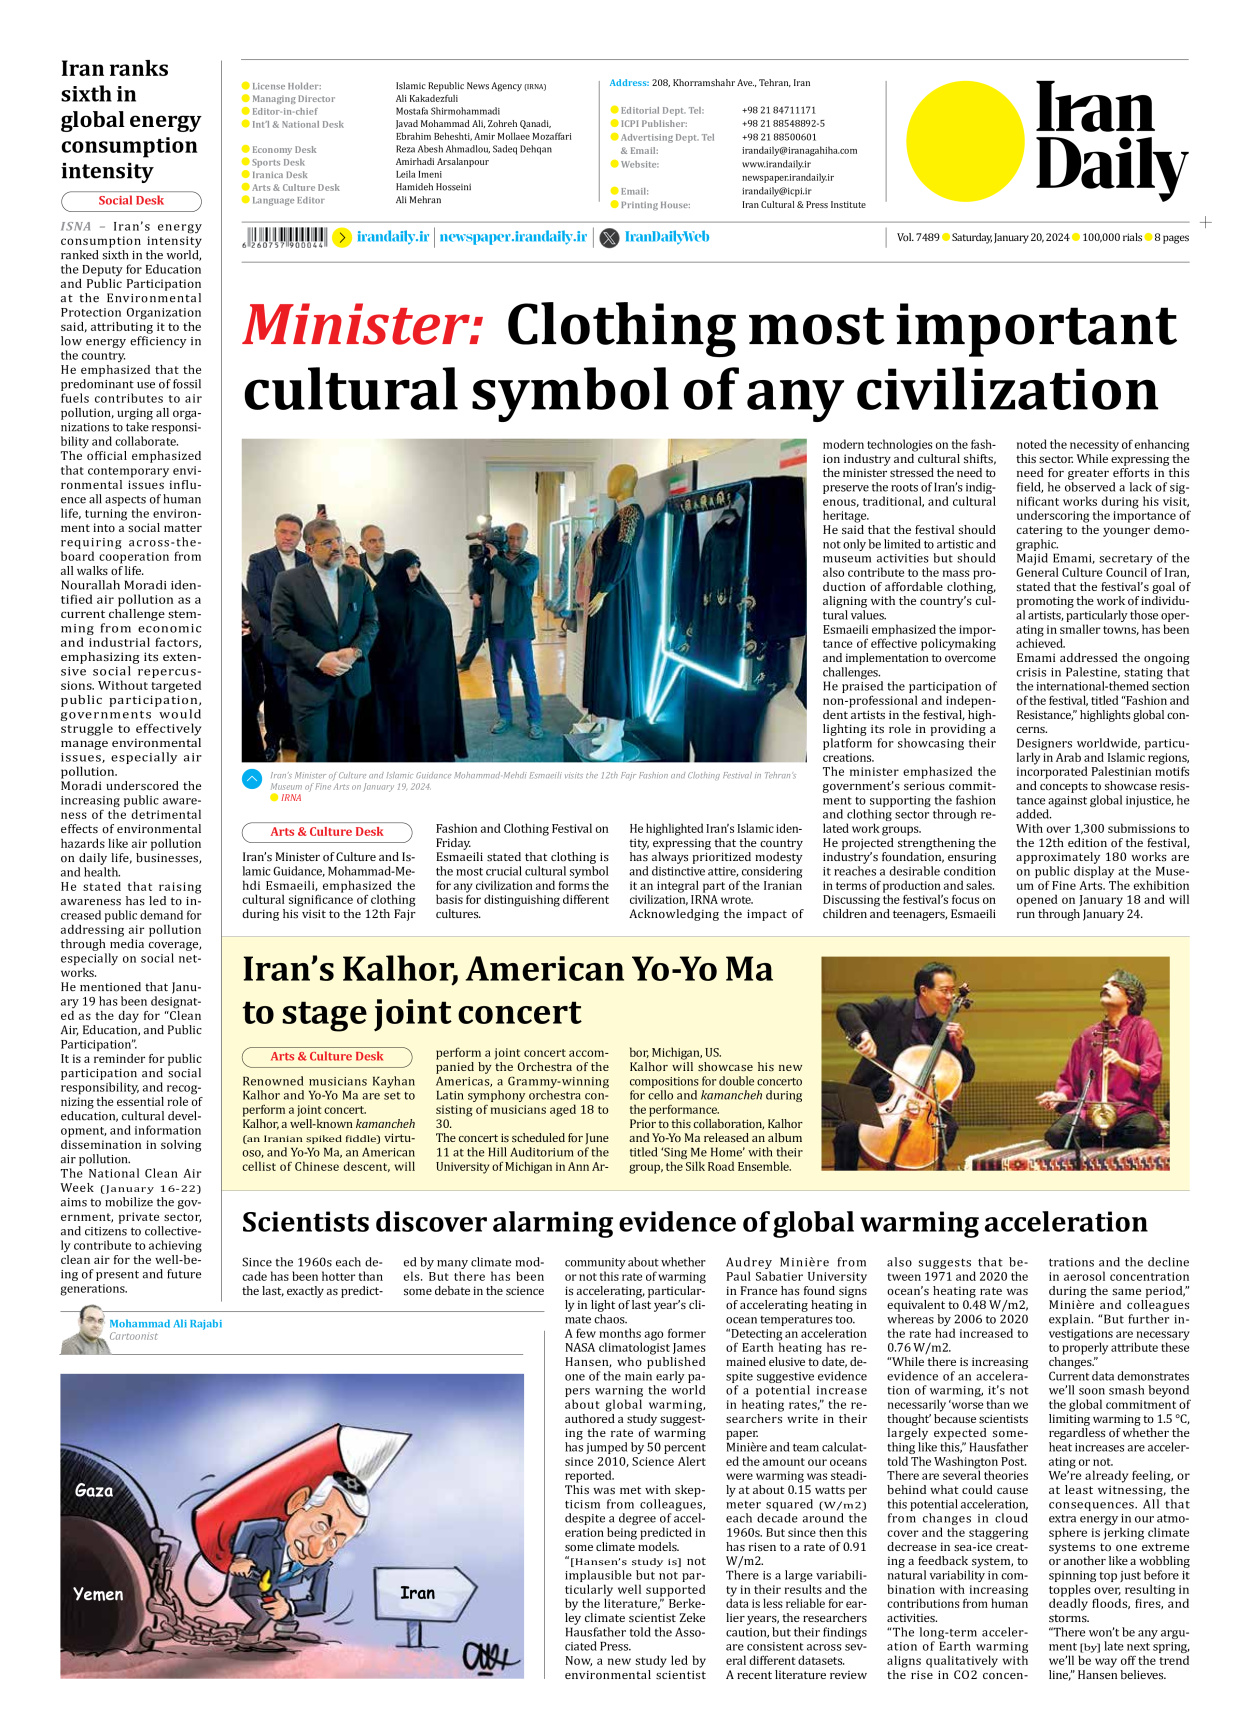 Iran Daily - Number Seven Thousand Four Hundred and Eighty Nine - 20 January 2024 - Page 8